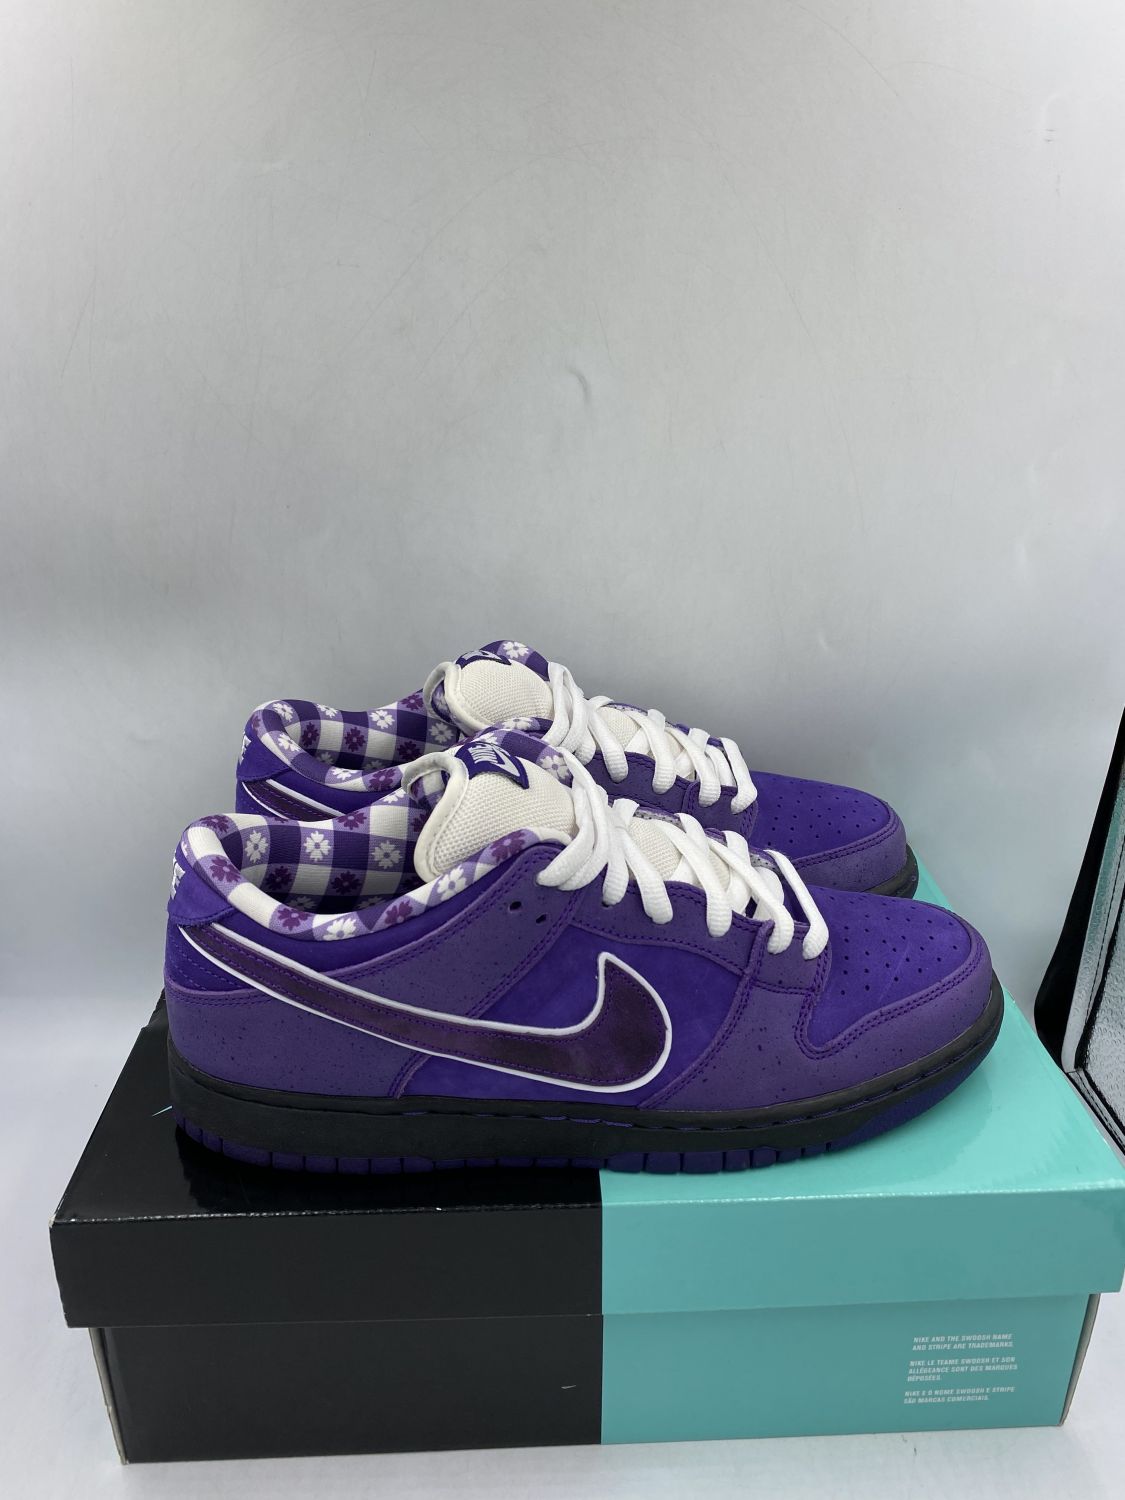 Nike SB Dunk Low Concepts Purple Lobster | AfterMarket